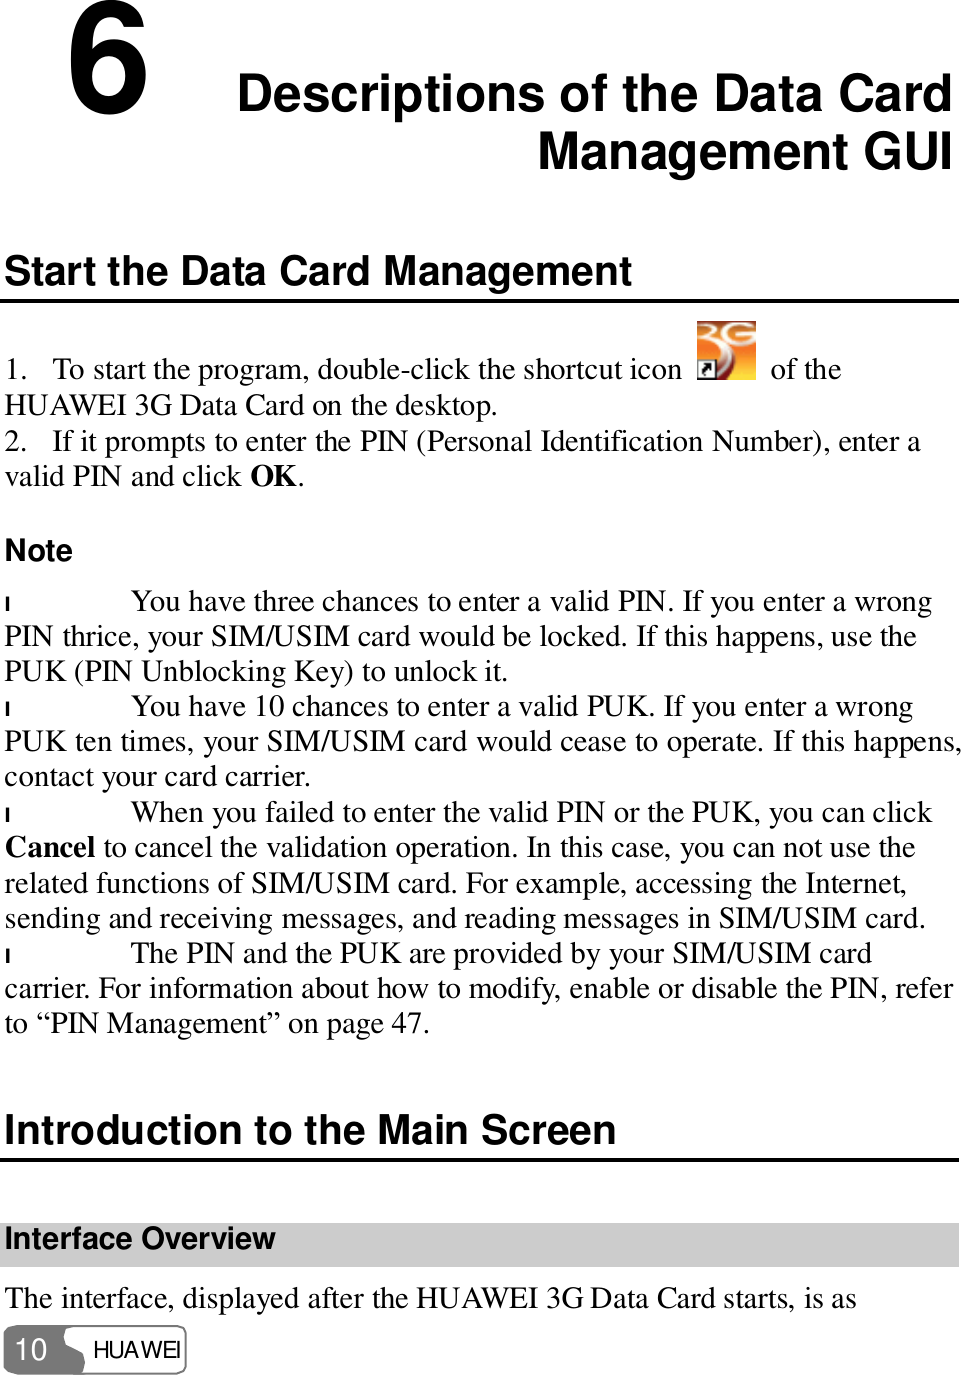  HUAWEI  10 6  Descriptions of the Data Card Management GUI Start the Data Card Management 1. To start the program, double-click the shortcut icon   of the HUAWEI 3G Data Card on the desktop. 2. If it prompts to enter the PIN (Personal Identification Number), enter a valid PIN and click OK. Note  l You have three chances to enter a valid PIN. If you enter a wrong PIN thrice, your SIM/USIM card would be locked. If this happens, use the PUK (PIN Unblocking Key) to unlock it. l You have 10 chances to enter a valid PUK. If you enter a wrong PUK ten times, your SIM/USIM card would cease to operate. If this happens, contact your card carrier. l When you failed to enter the valid PIN or the PUK, you can click Cancel to cancel the validation operation. In this case, you can not use the related functions of SIM/USIM card. For example, accessing the Internet, sending and receiving messages, and reading messages in SIM/USIM card. l The PIN and the PUK are provided by your SIM/USIM card carrier. For information about how to modify, enable or disable the PIN, refer to “PIN Management” on page 47. Introduction to the Main Screen Interface Overview The interface, displayed after the HUAWEI 3G Data Card starts, is as 